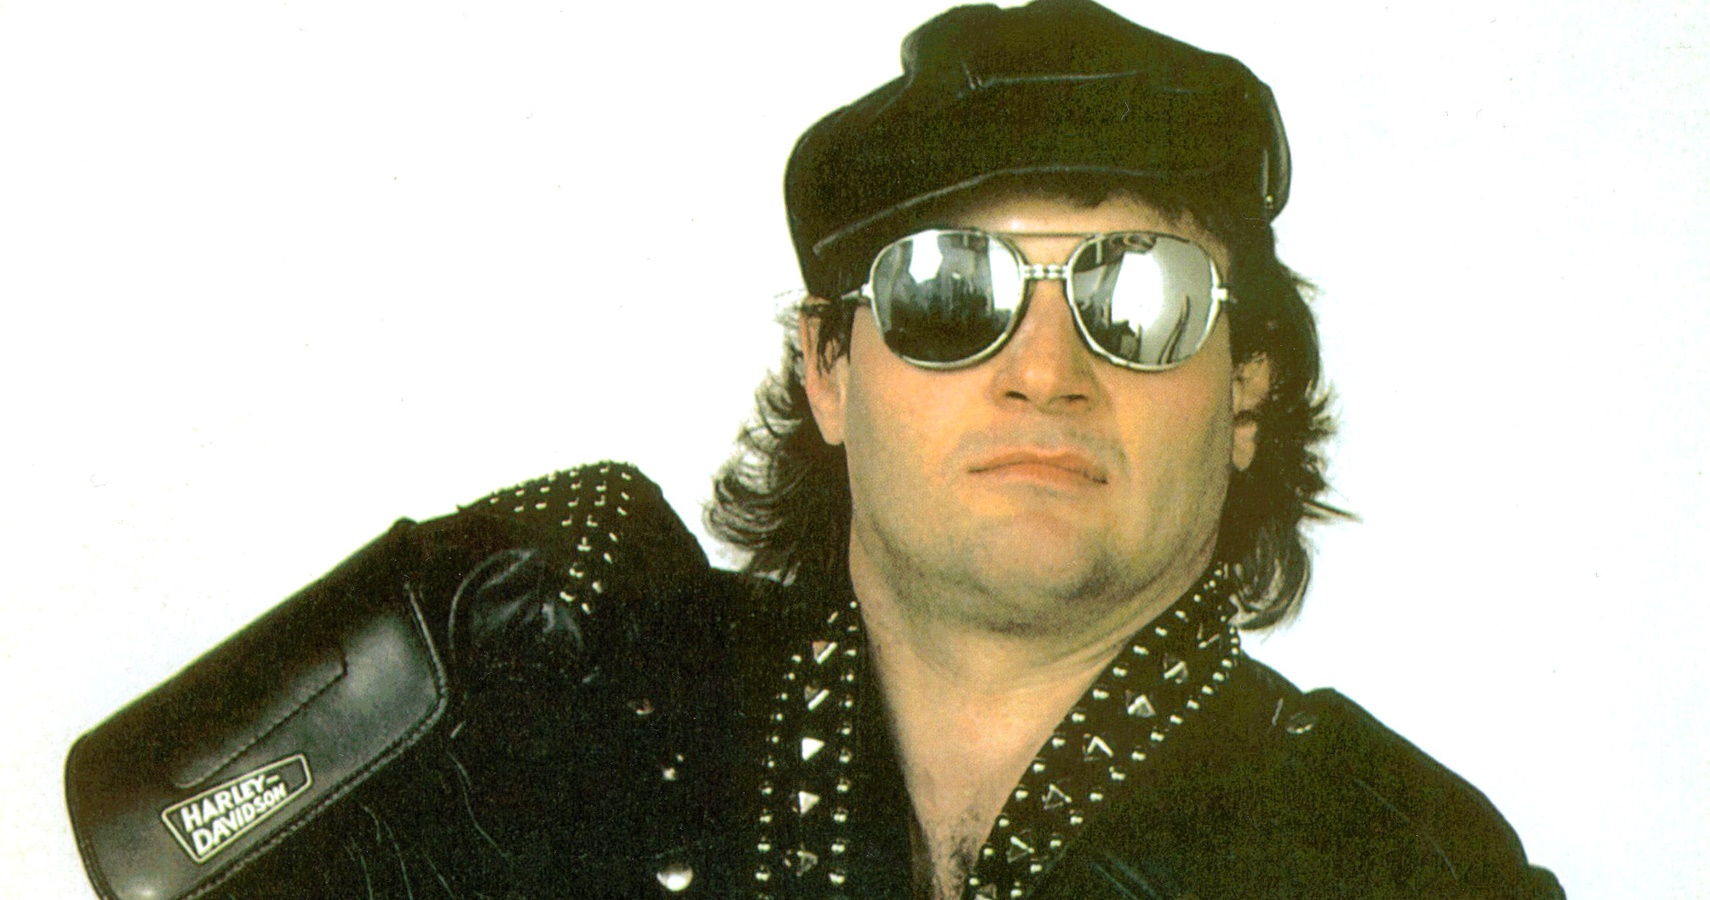 19-facts-about-adrian-adonis